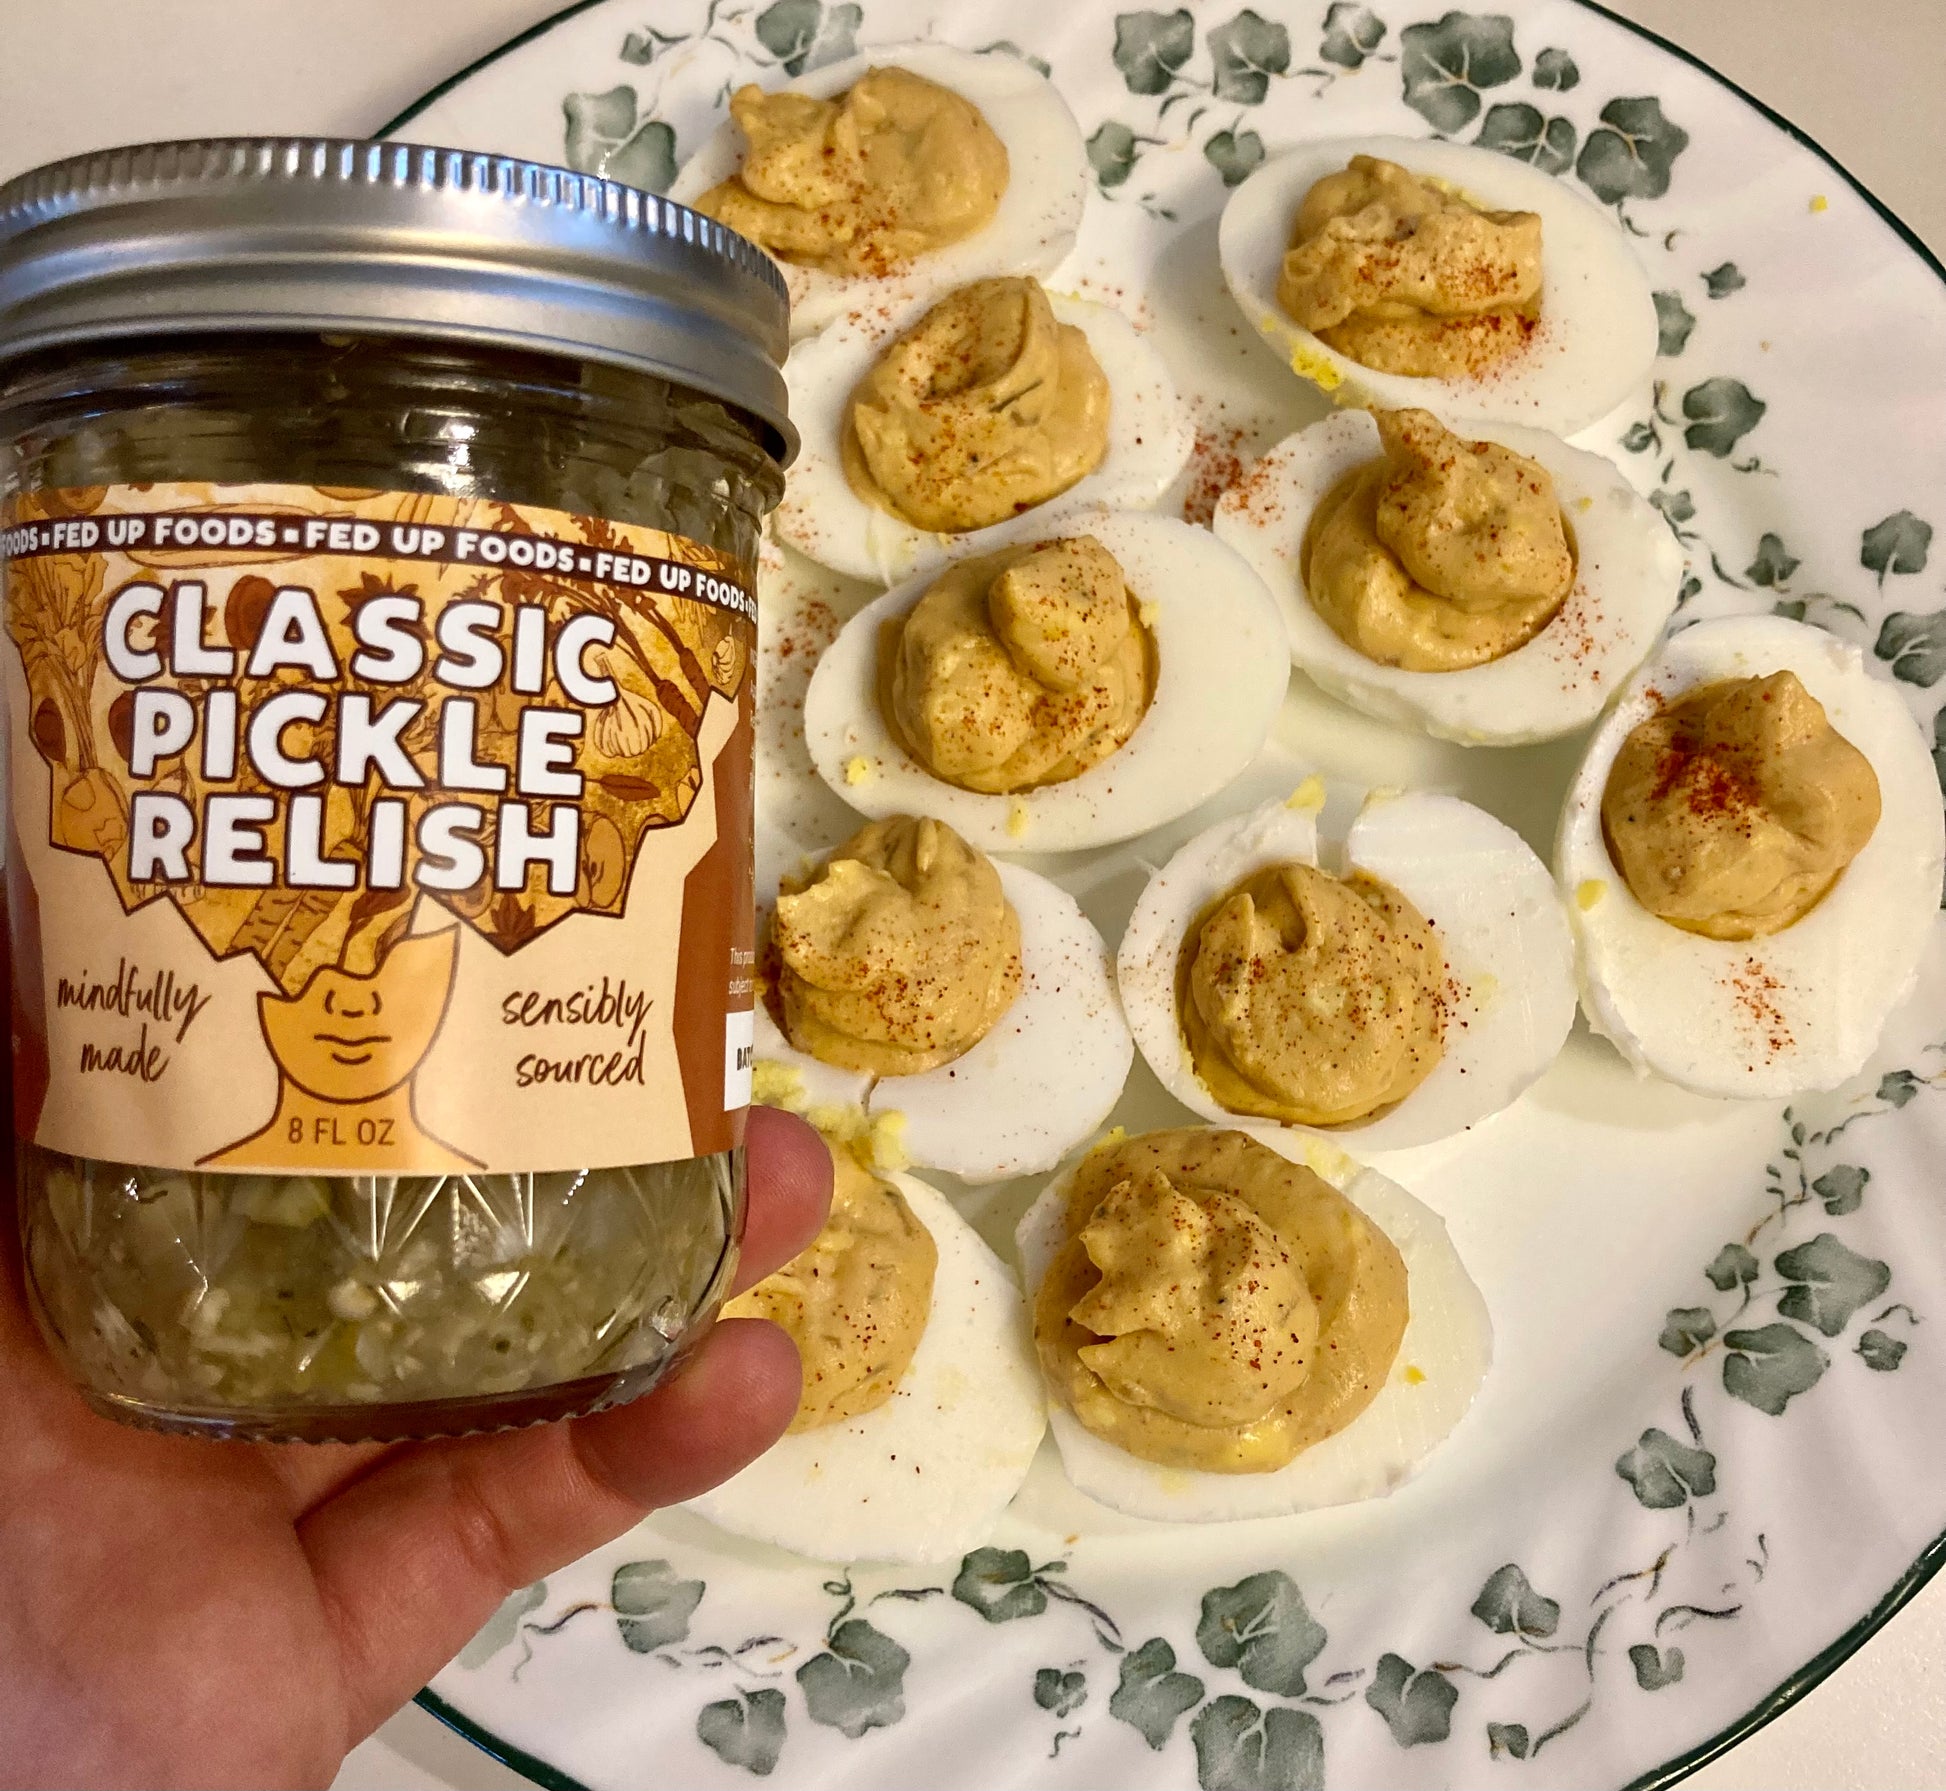 Fed Up Foods Classic Pickle relish shown with deviled eggs. Use classic relish in all kinds of recipes that call for pickle relish dill